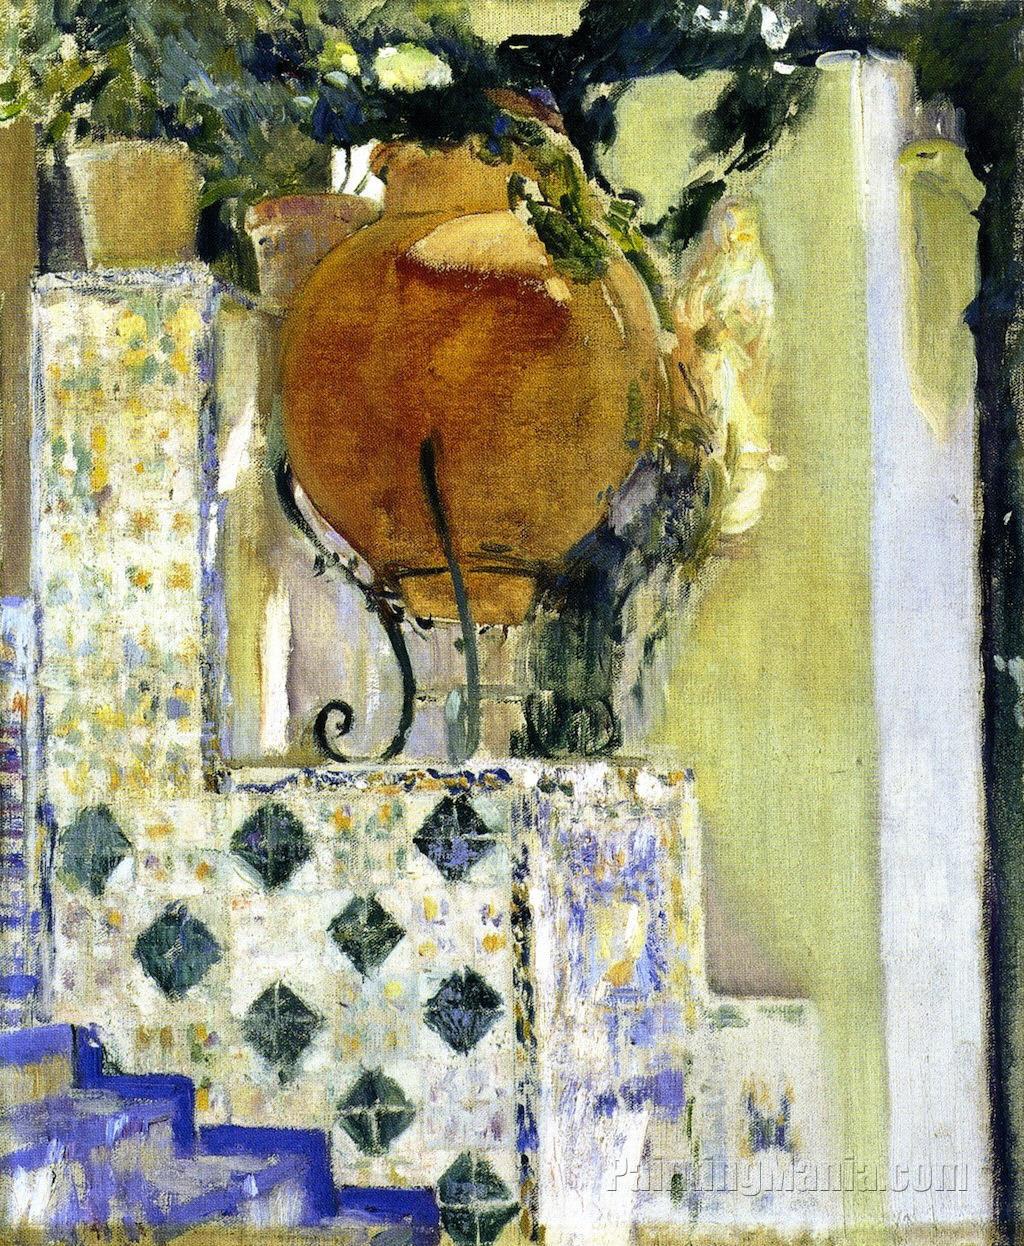 Detail of the Garden of the Sorolla House